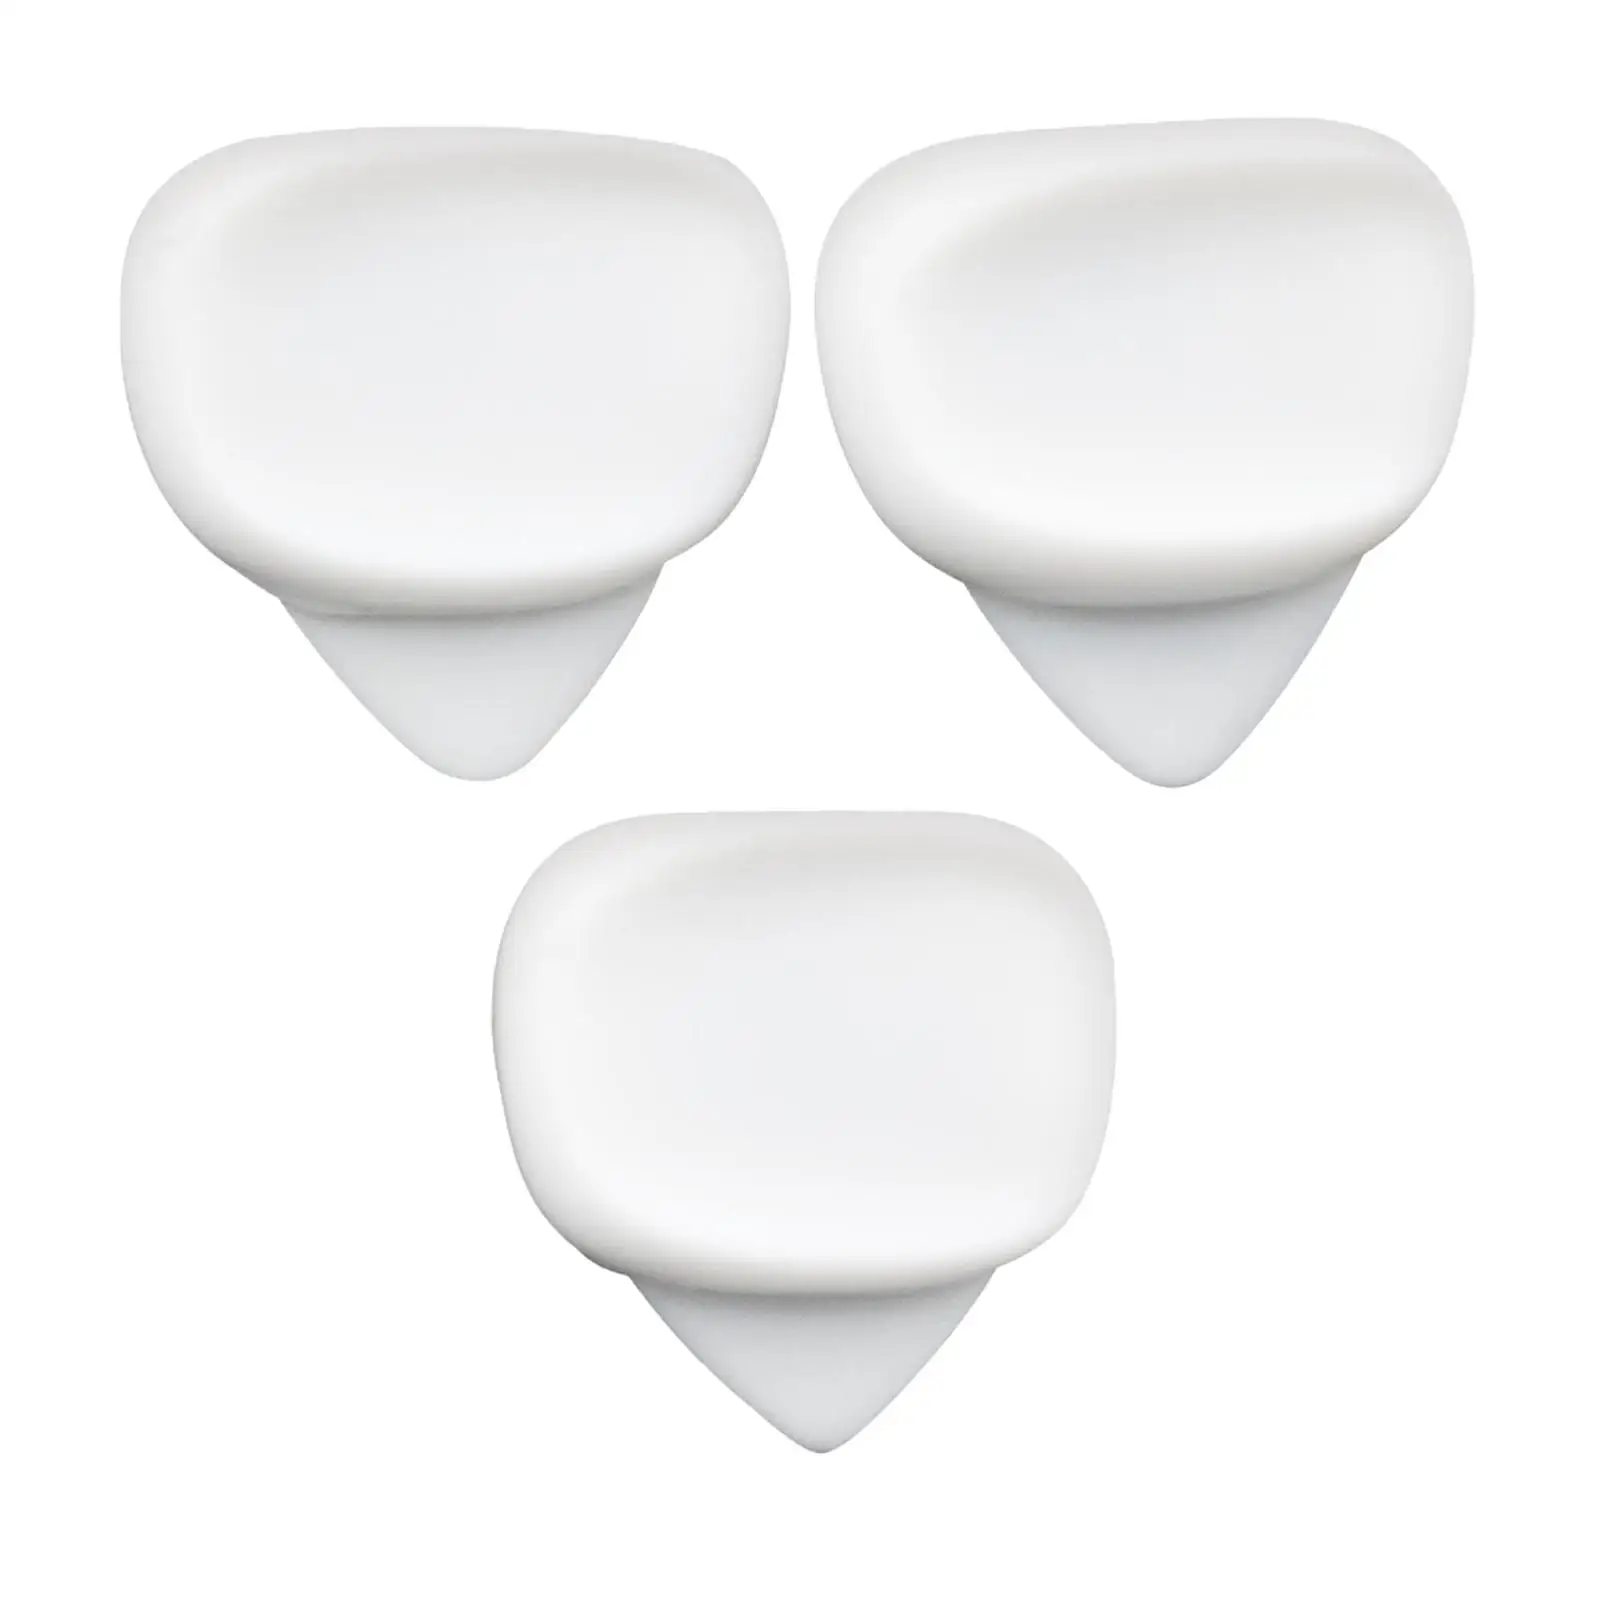 3 Guitar Picks 0.6/0.96/1.2mm Thickness, Acoustic Electric Guitar Bass Picks Plectrums, Slicone